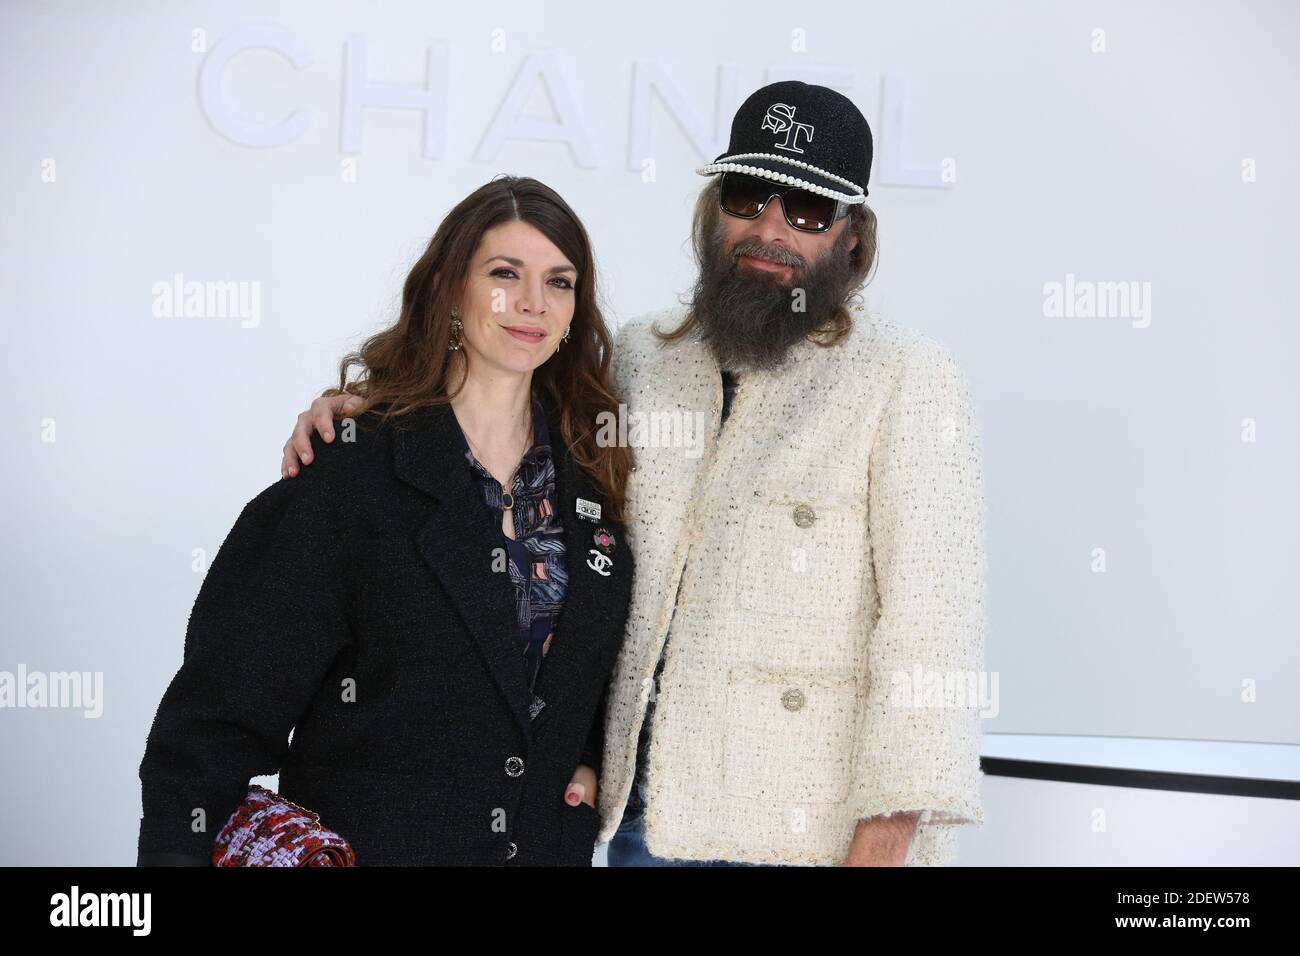 Amandine de la Richardiere and Sebastien Tellier attending the Chanel show as part of the Paris Fashion Week Womenswear Fall/Winter 2020/2021 in Paris, France on March 03, 2020. Photo by Jerome Domine/ABACAPRESS.COM Stock Photo